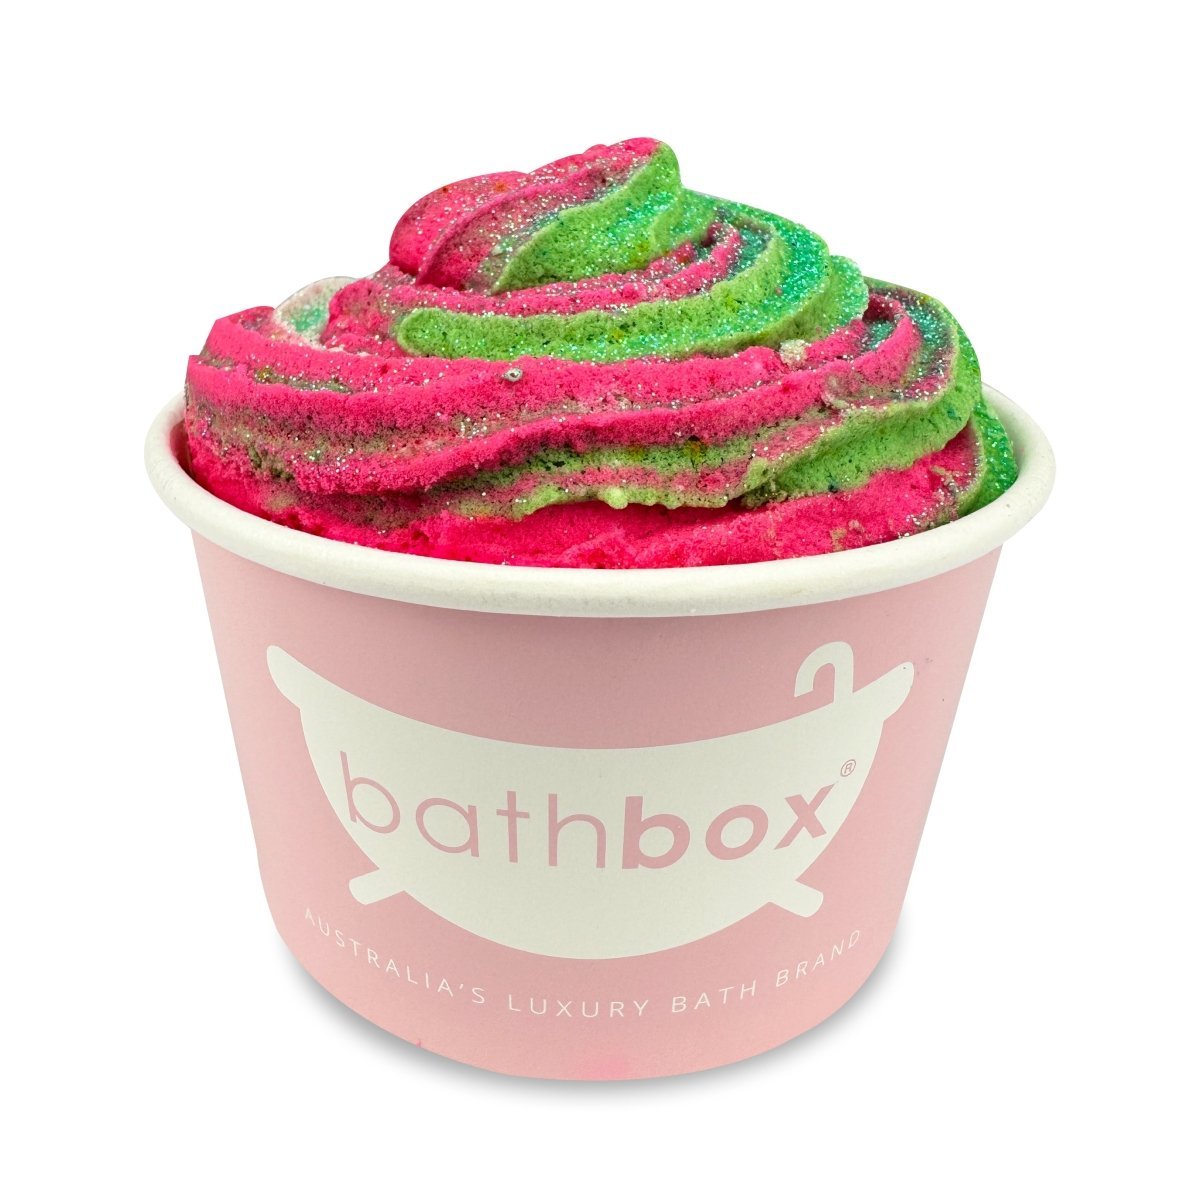 Watermelon Swirl Bath Bomb Ice Cream Cup for Kids & Adults - Colourful Glitter & Sprinkles - Made in Australia by Bath Box